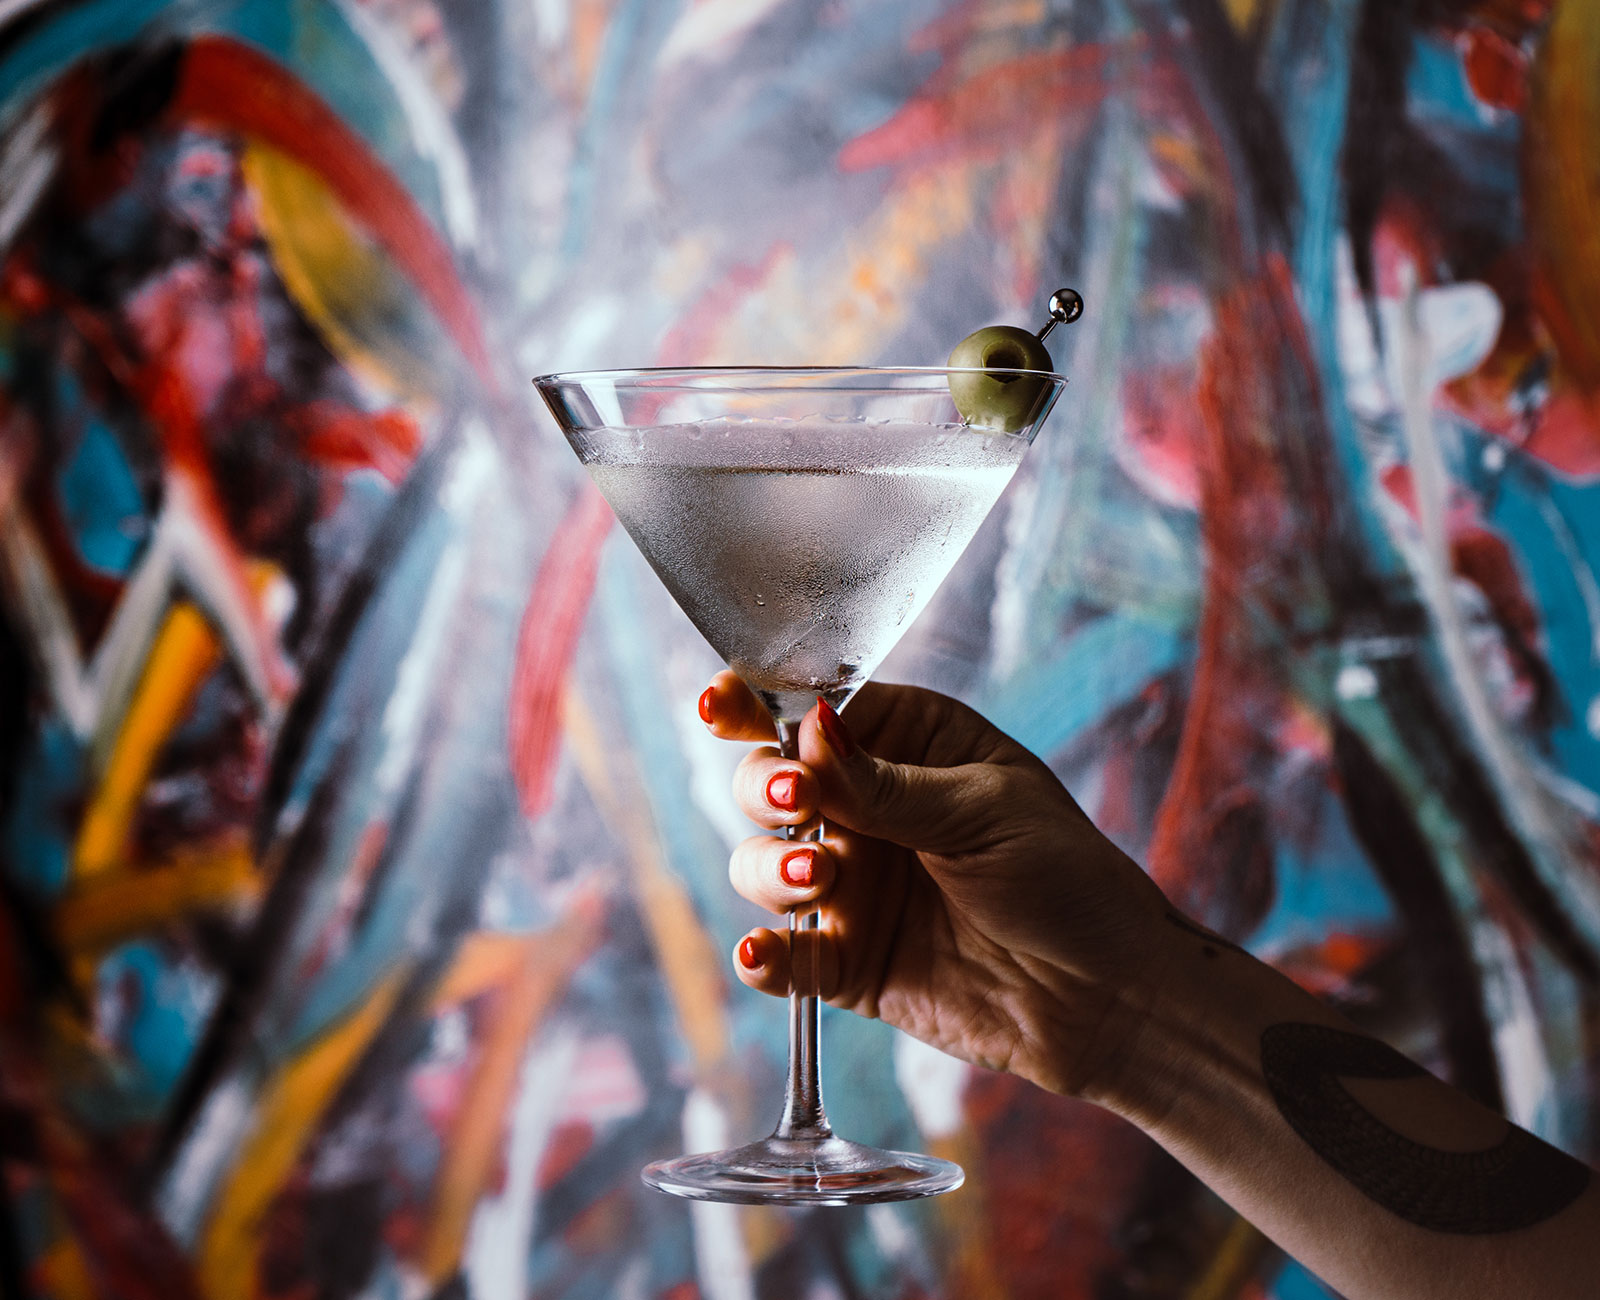 Vya Whisper Dry Vodka Martini with an olive garnish and a painting in the background